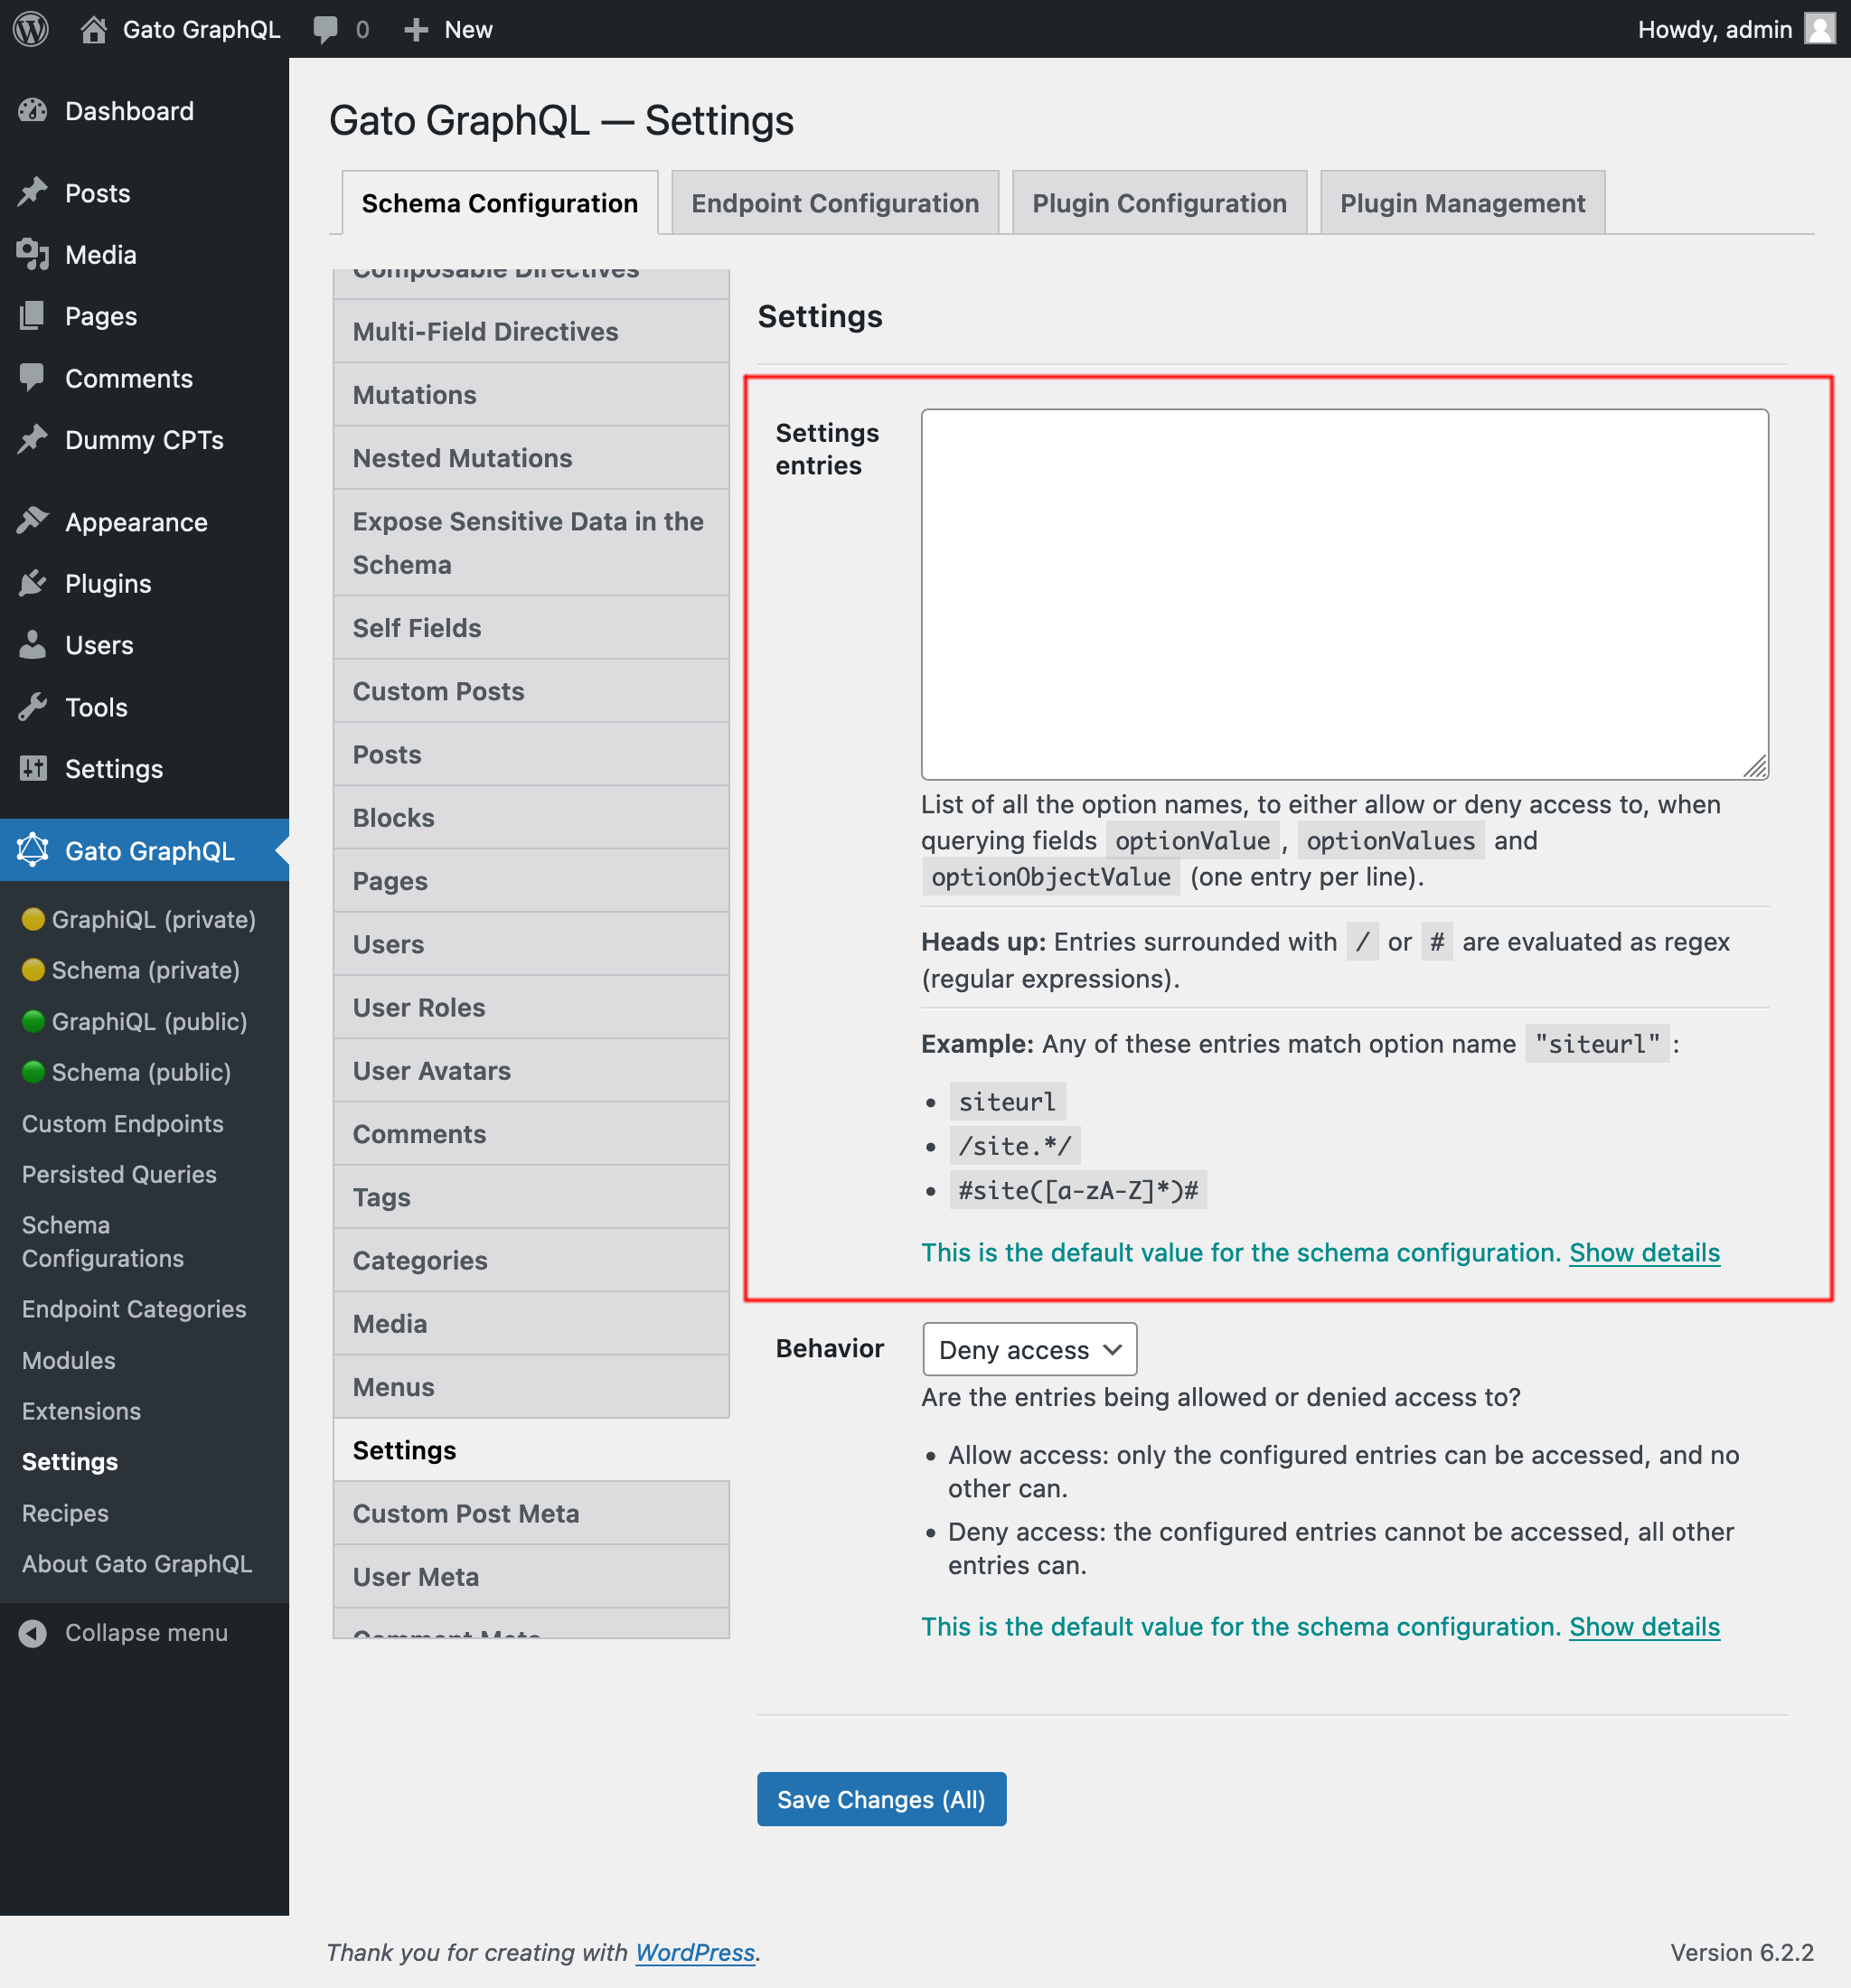 Defining the entries in the Settings